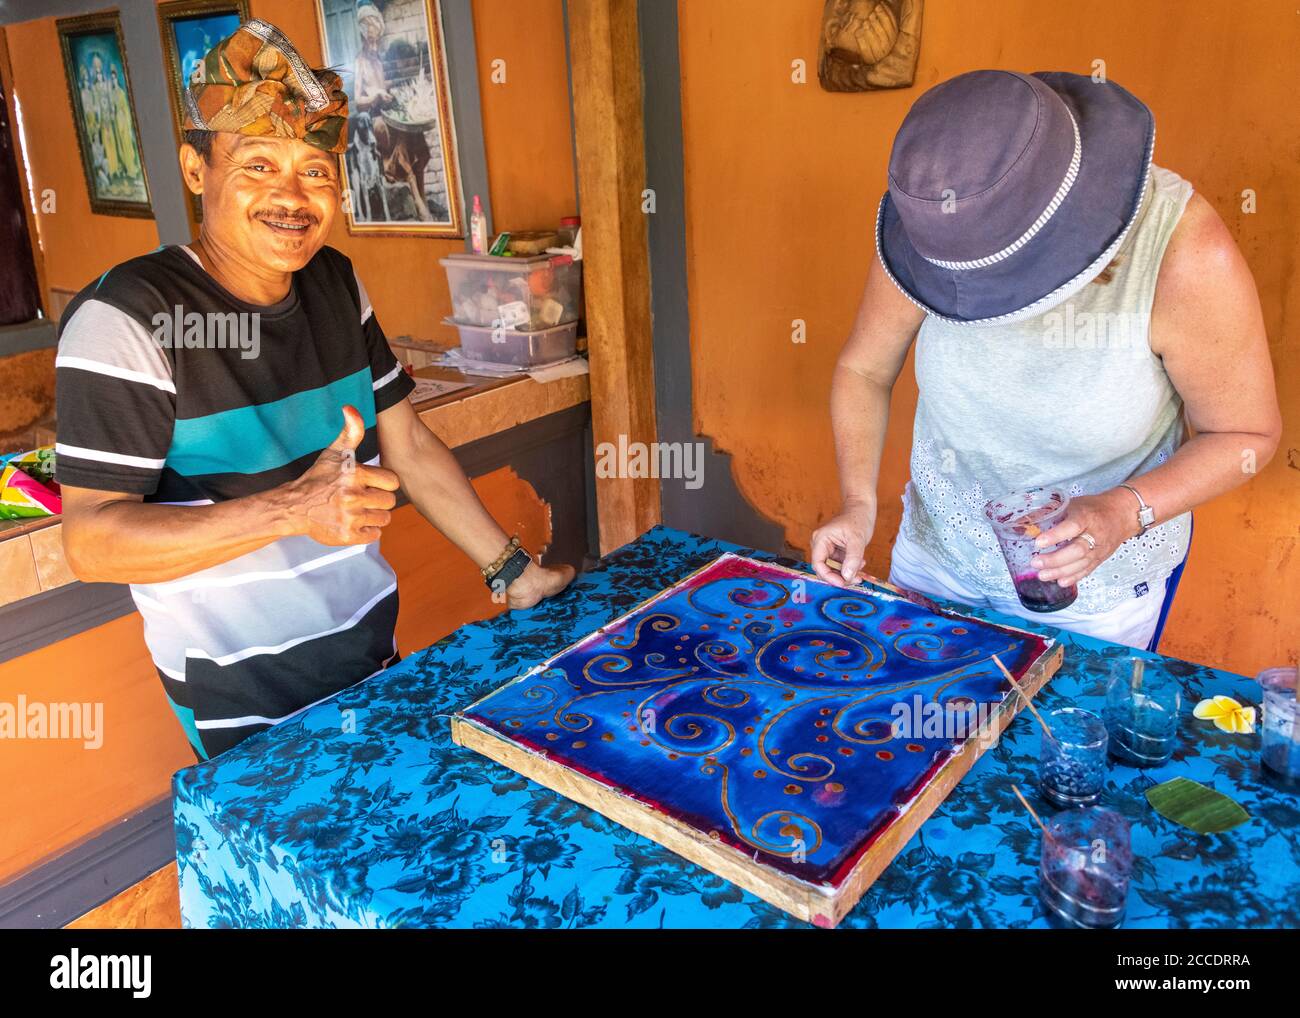 Batik is an traditional Balinese art technique of wax-resist dyeing applied to whole cloth. This technique originated from Java but has become popular Stock Photo